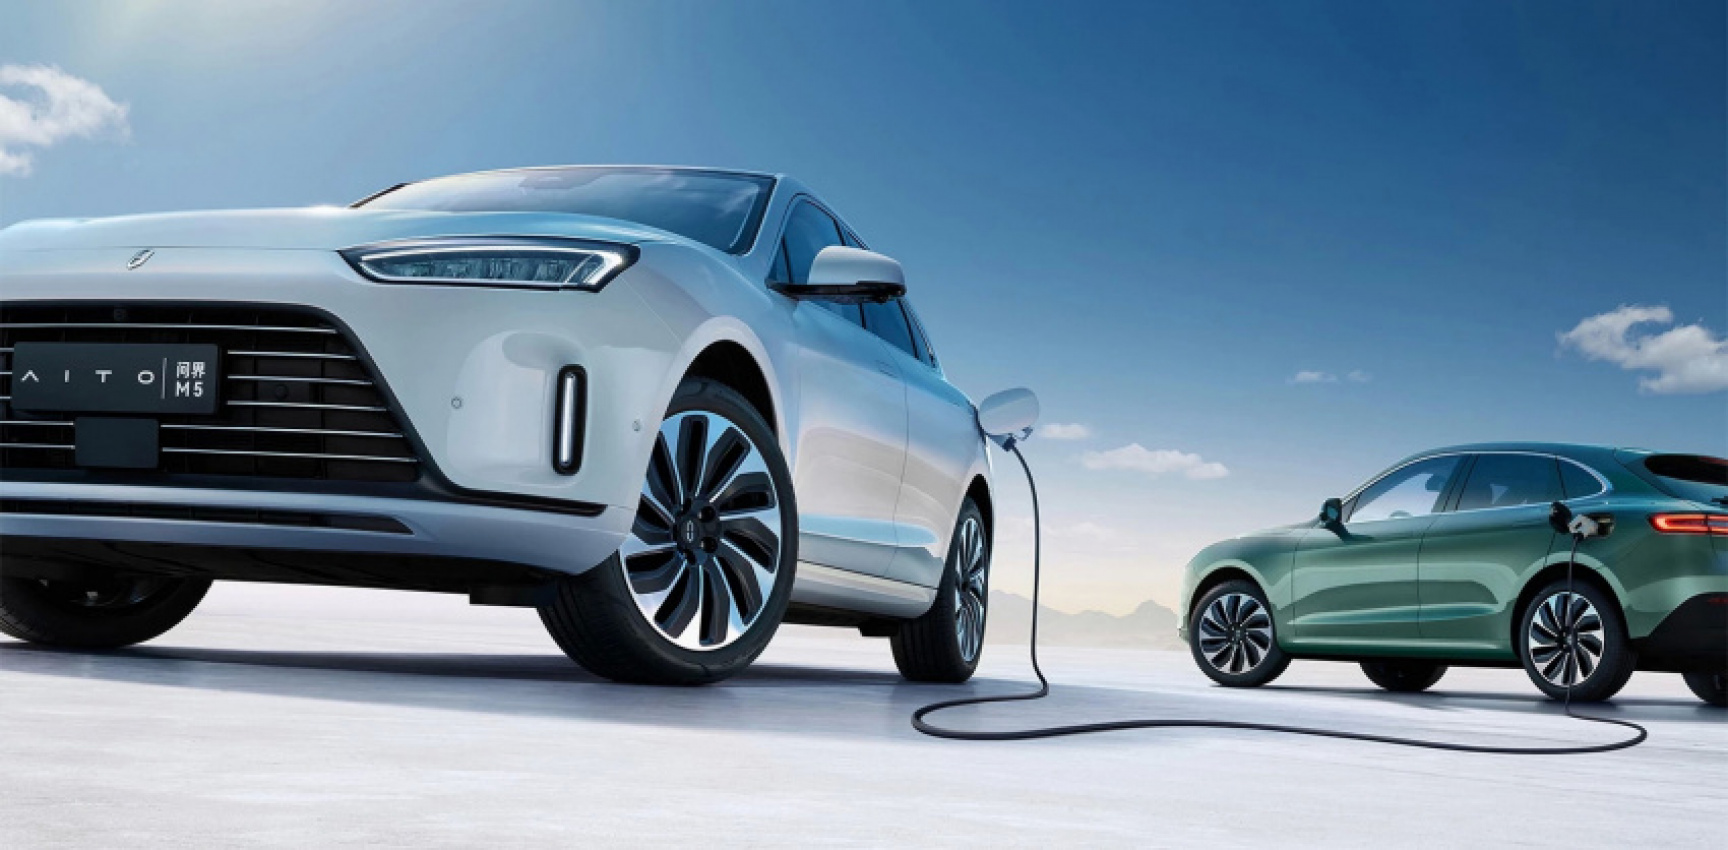 autos, cars, huawei, news, china, hybrids, new cars, phev, aito m5 phev suv launched in china with huawei tech and range-extender ice